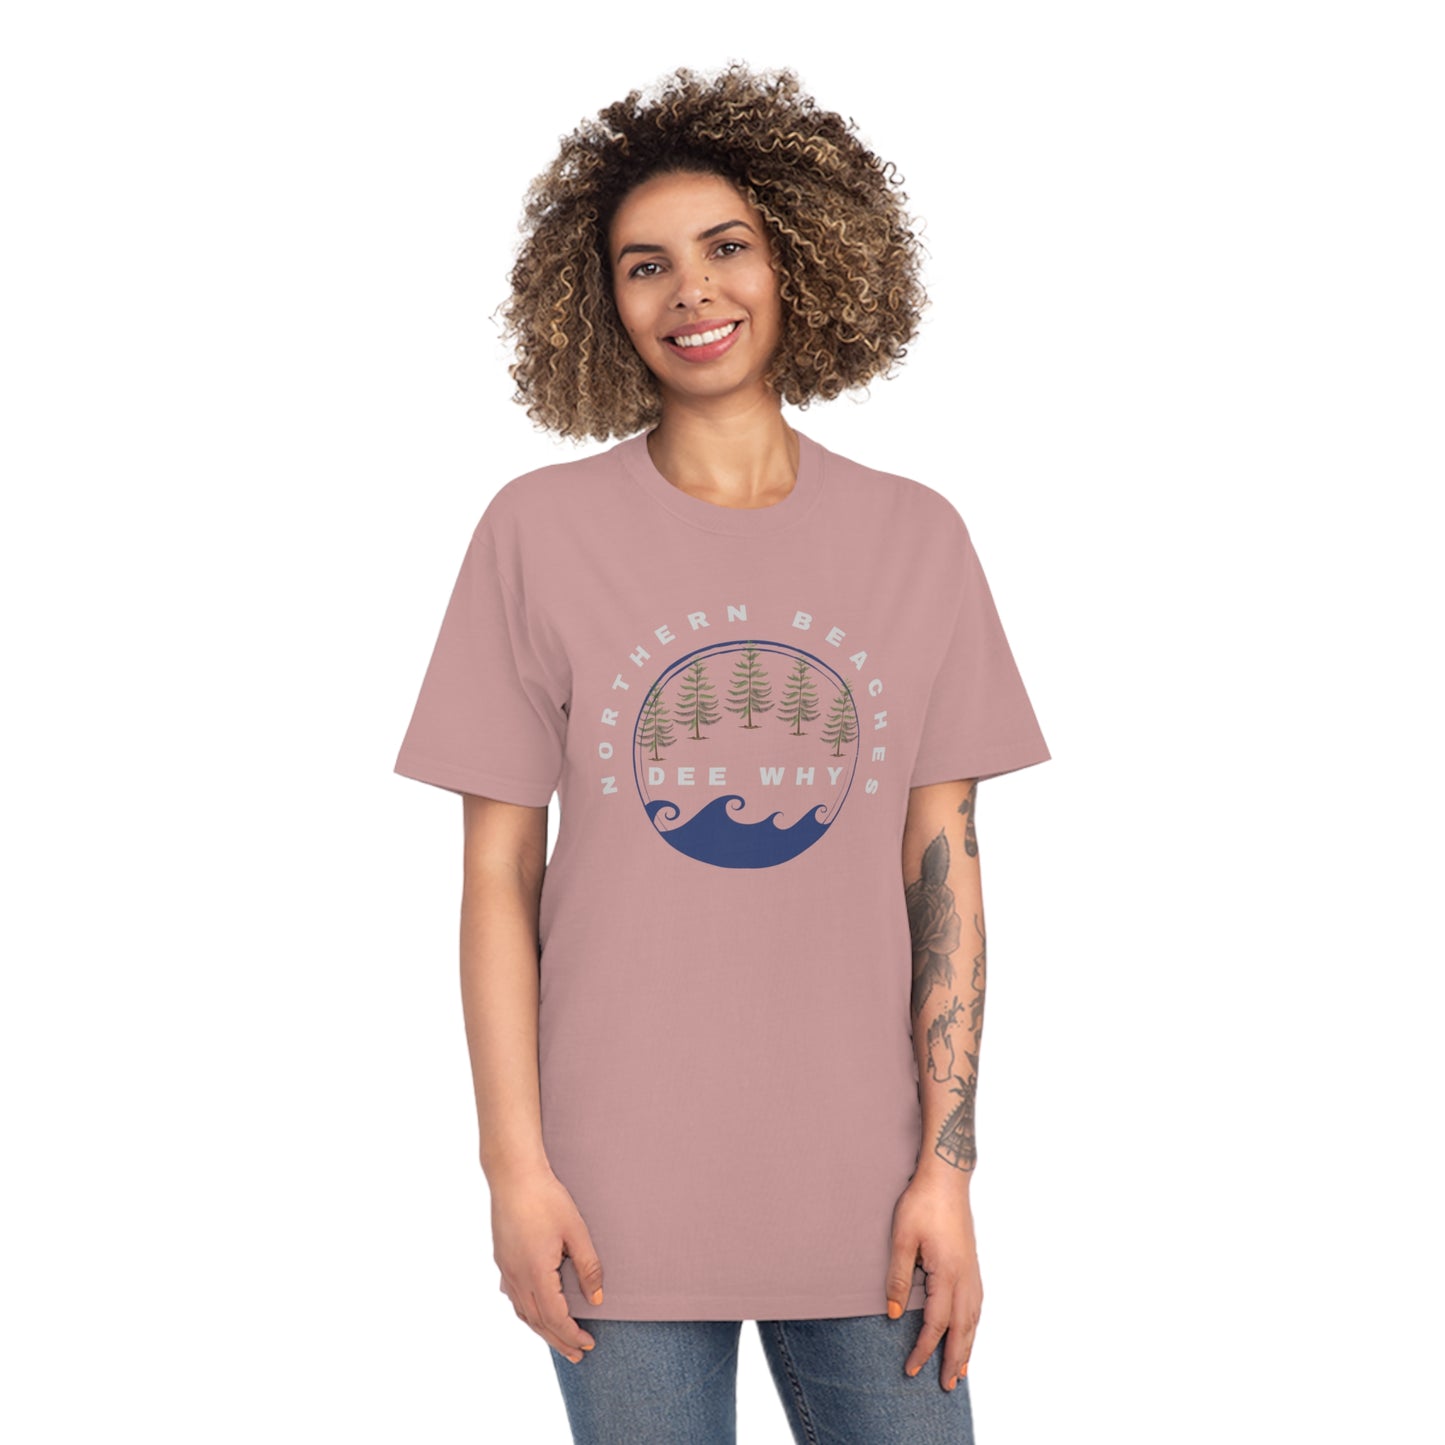 Cotton T-Shirt Northern Beaches Dee Why logo